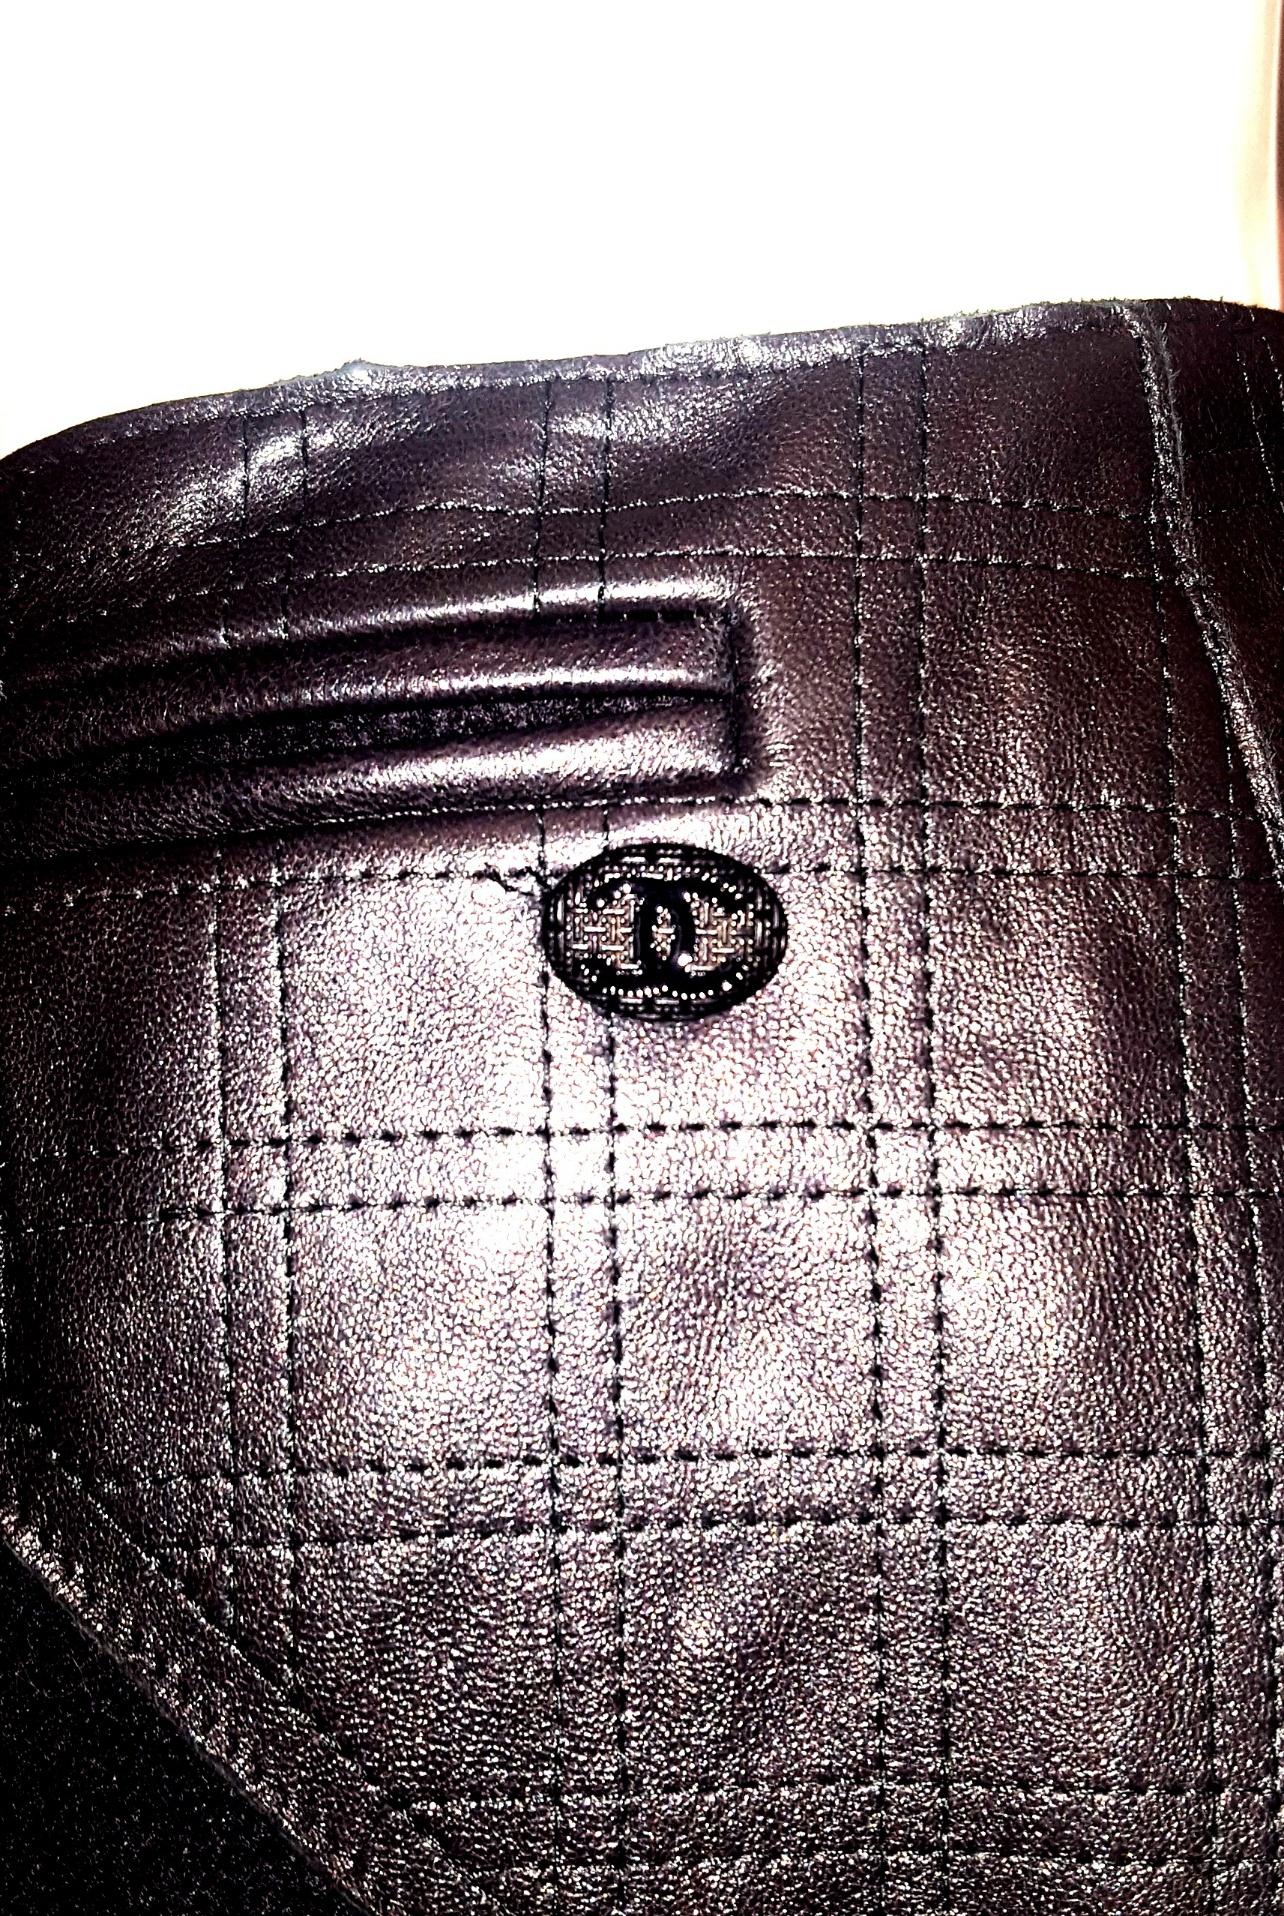 Chanel Black Wool Skirt W/ Leather Trim At Hip & Front of Skirt  1